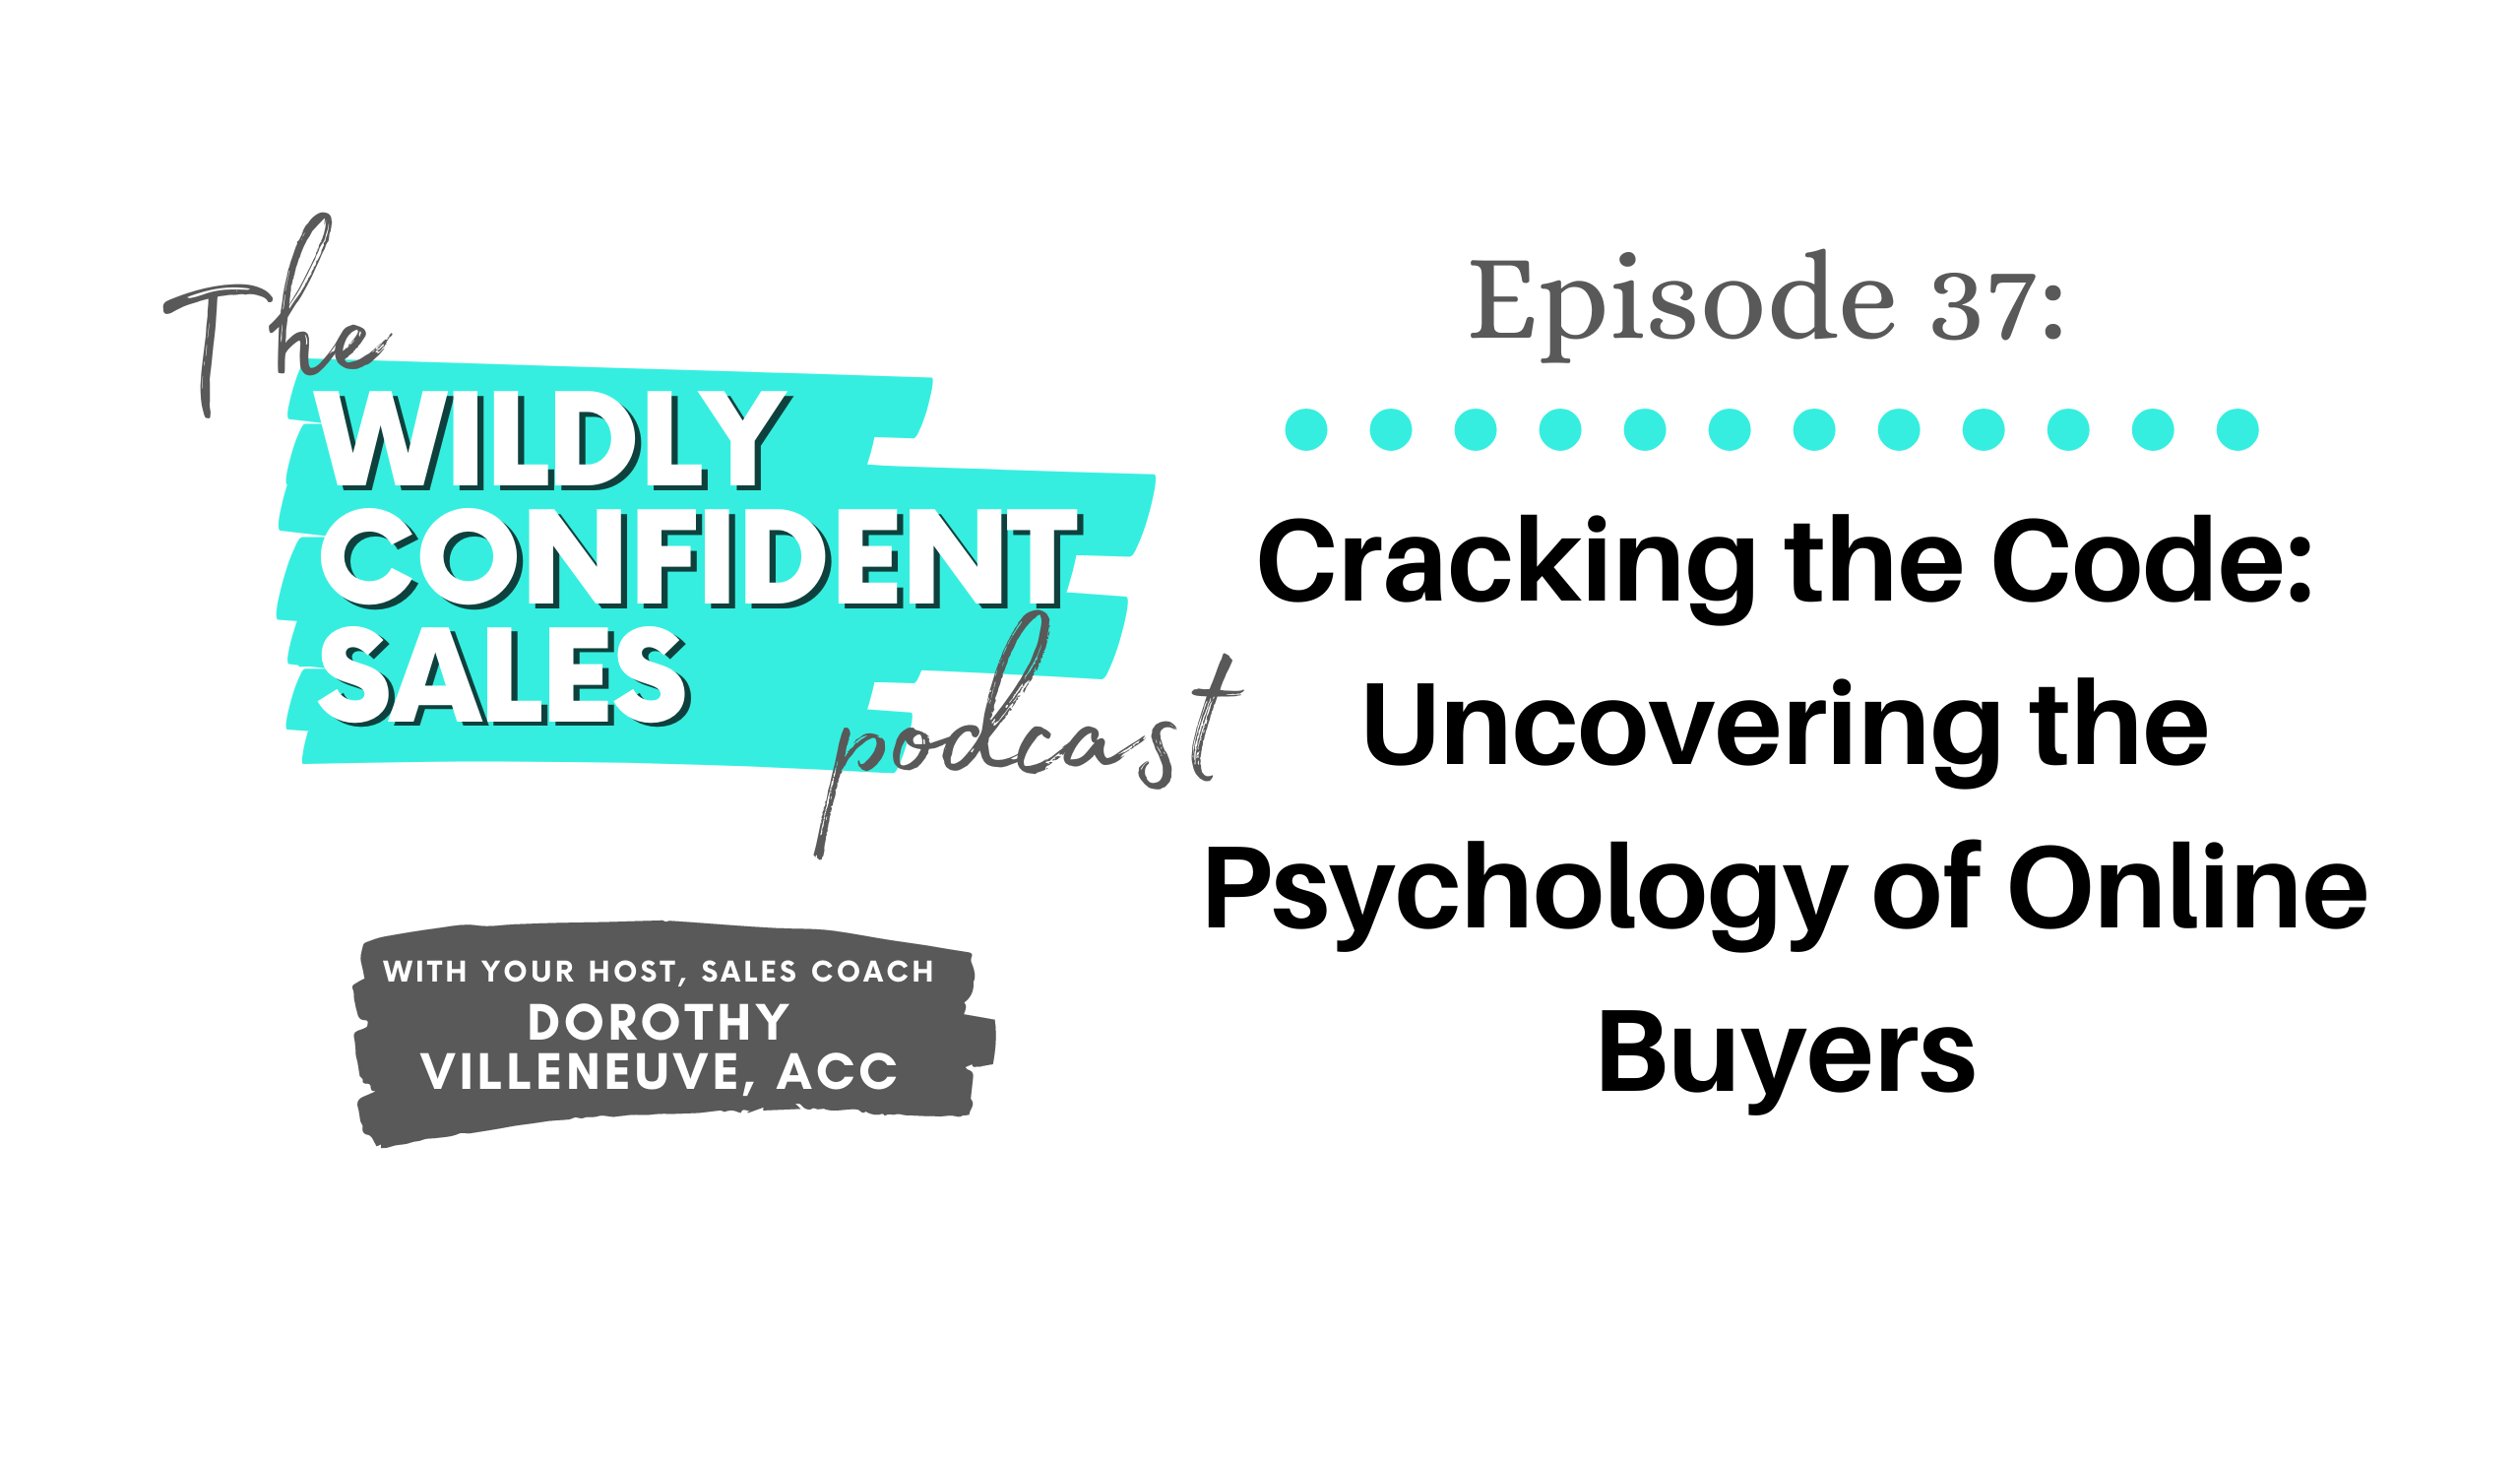 Cracking the Code: Uncovering the Psychology of Online Buyers